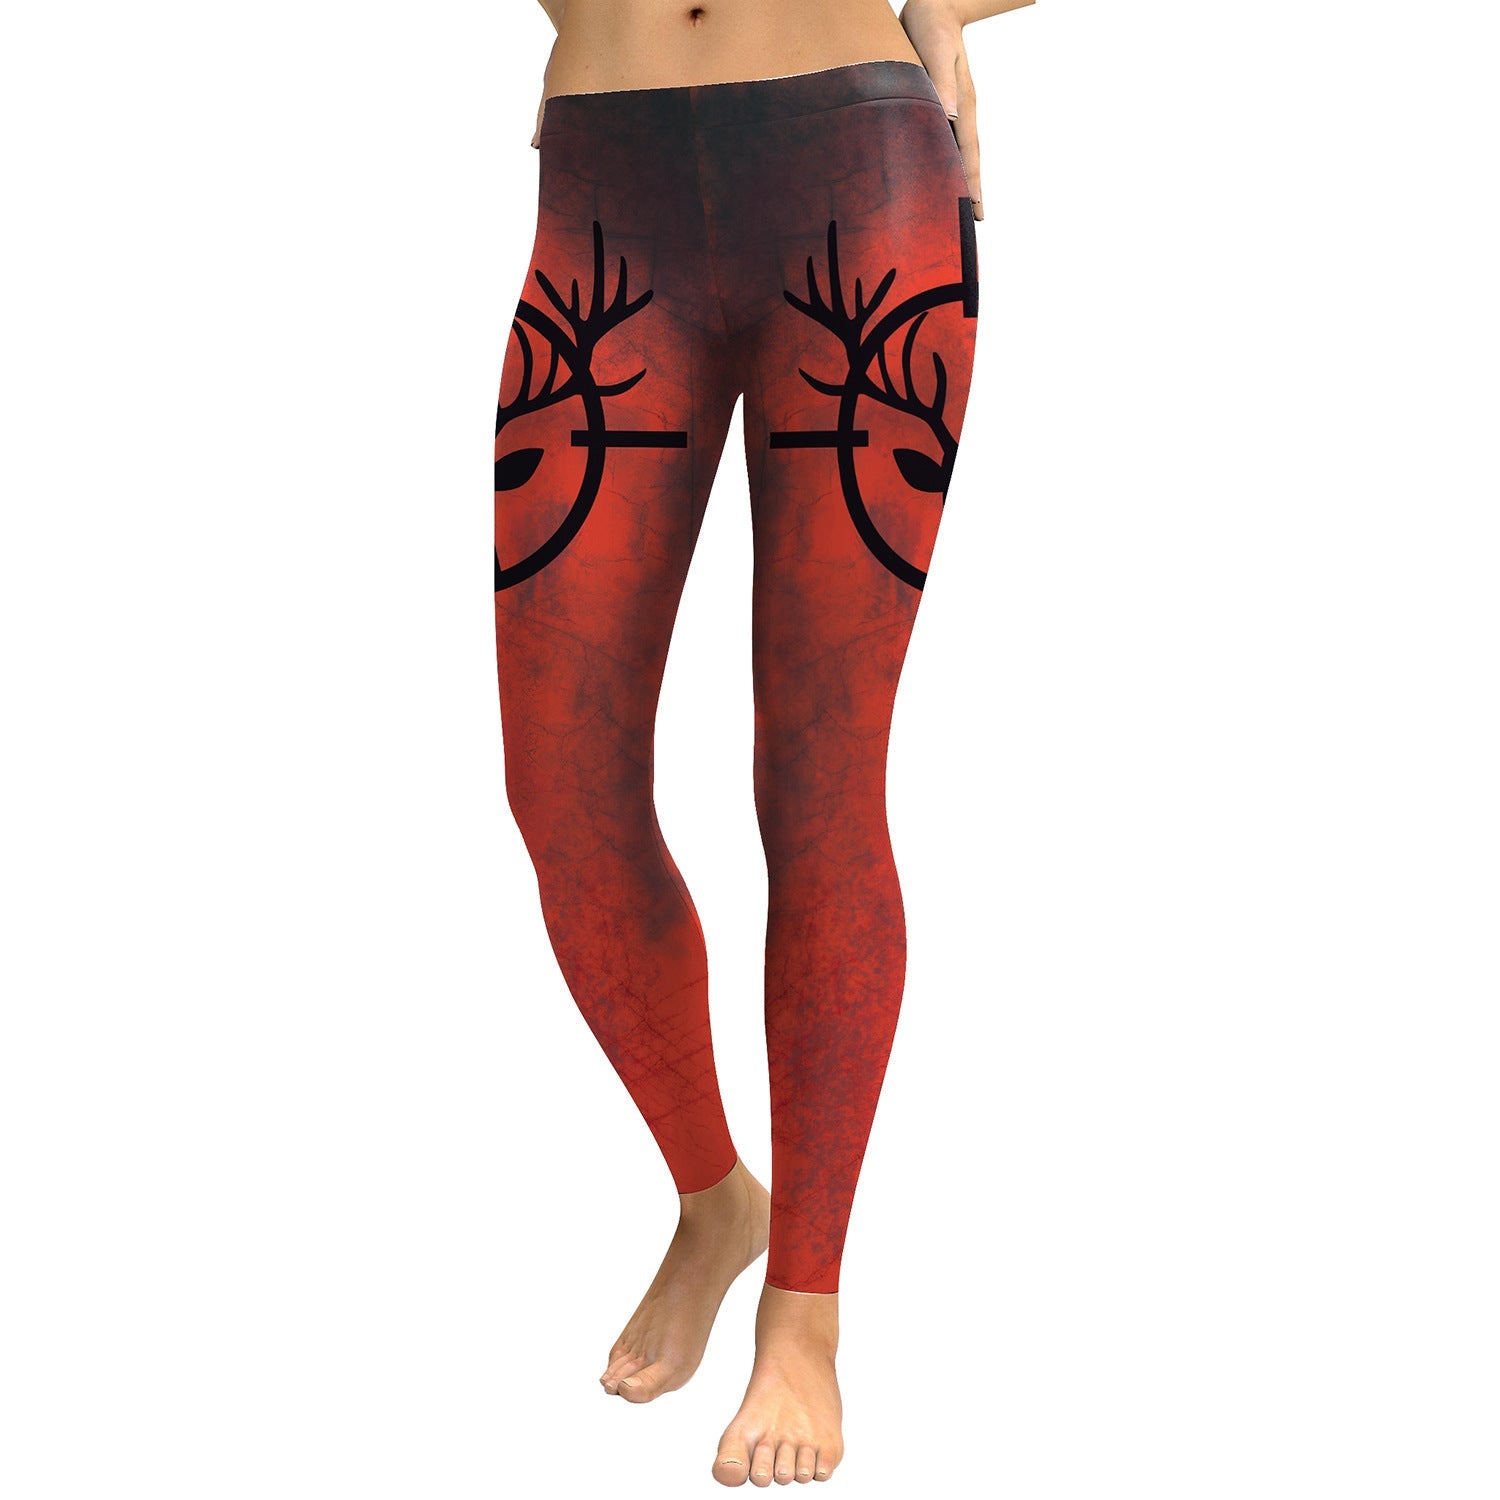 Sexy 3D Print Halloween Leggings for Women-Pants-KDK1801-S-Free Shipping at meselling99